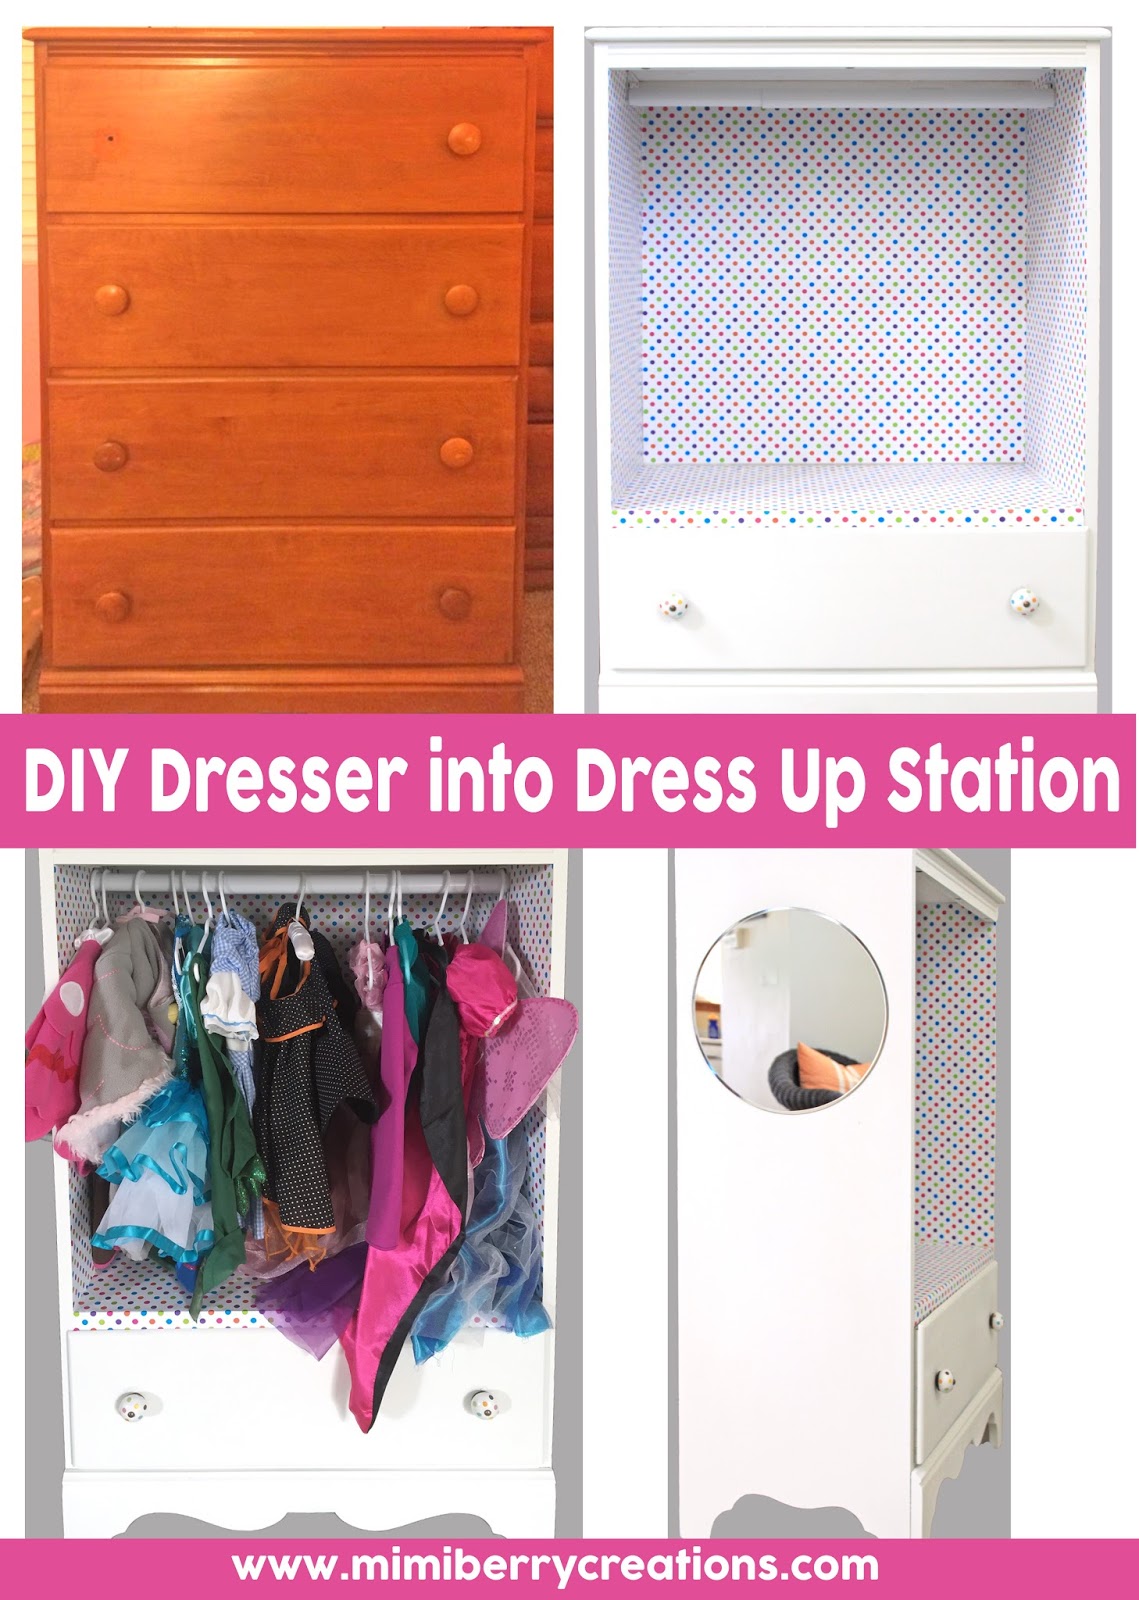 mimiberry creations: DIY Dress Up Station